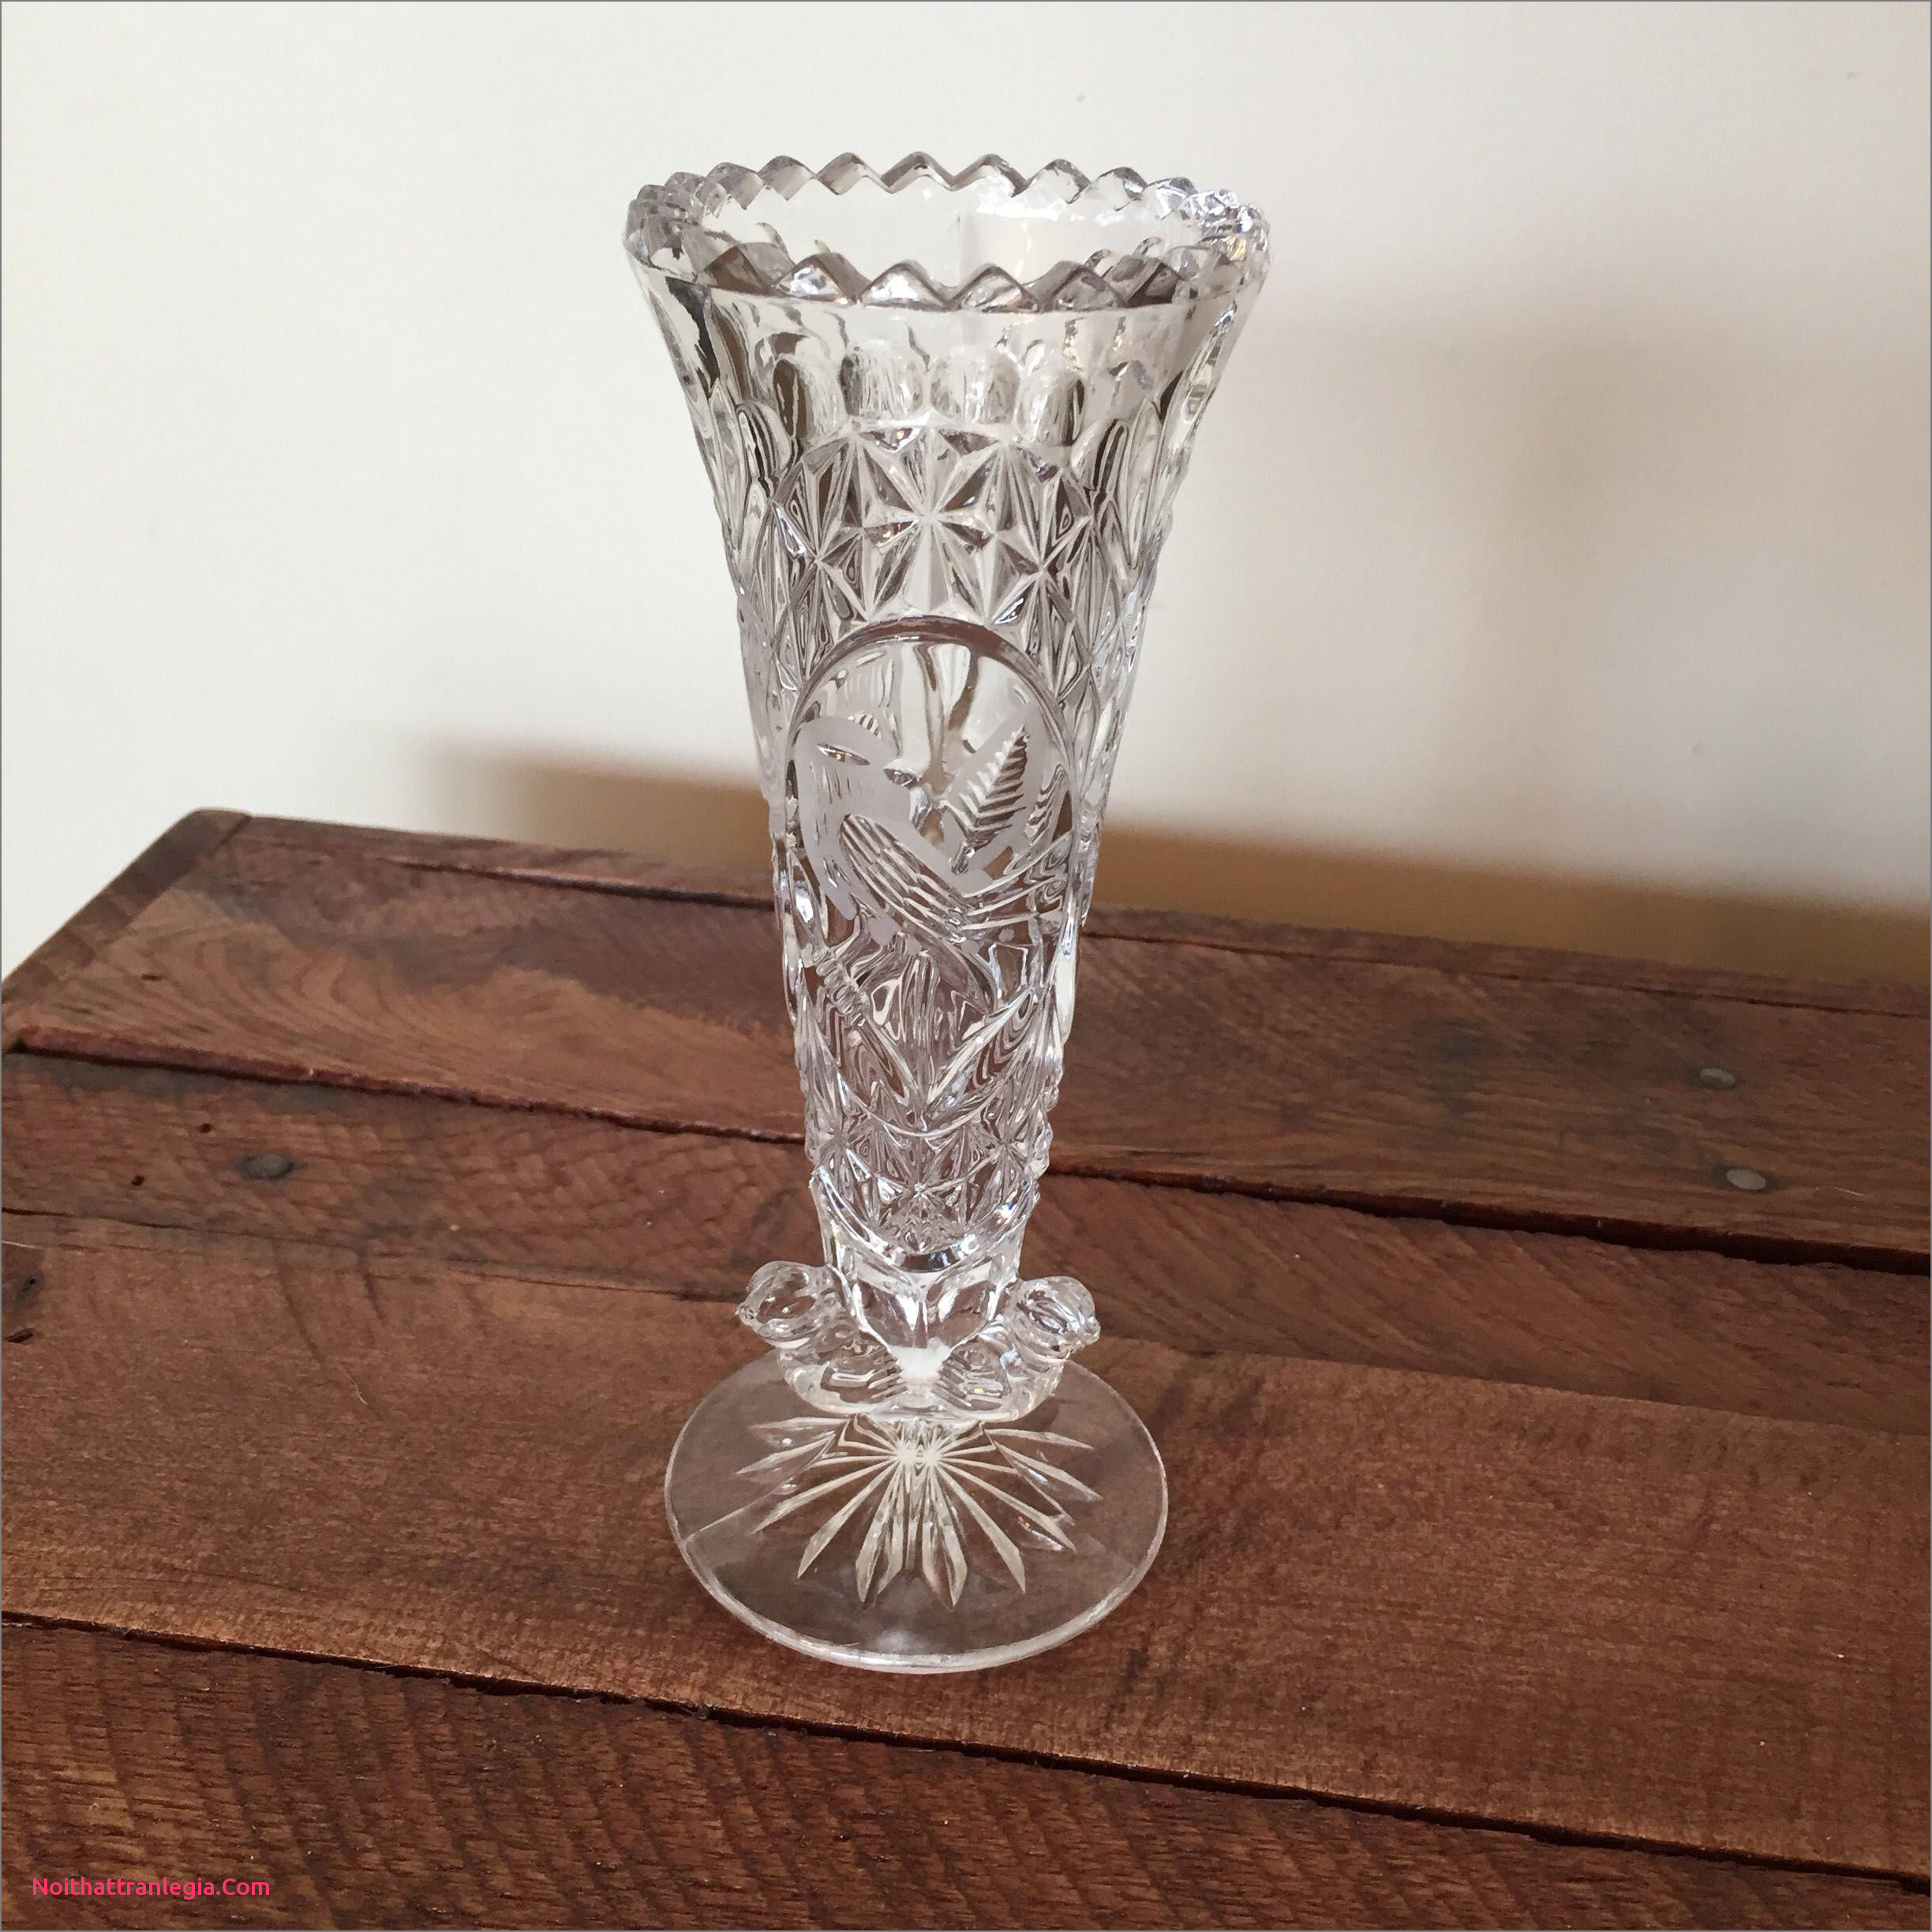 30 attractive Glass Pitcher Vase 2022 free download glass pitcher vase of 20 cut glass antique vase noithattranlegia vases design throughout vintage cut glass bird vase etched glass vase three glass birds perched on vase crystal bird